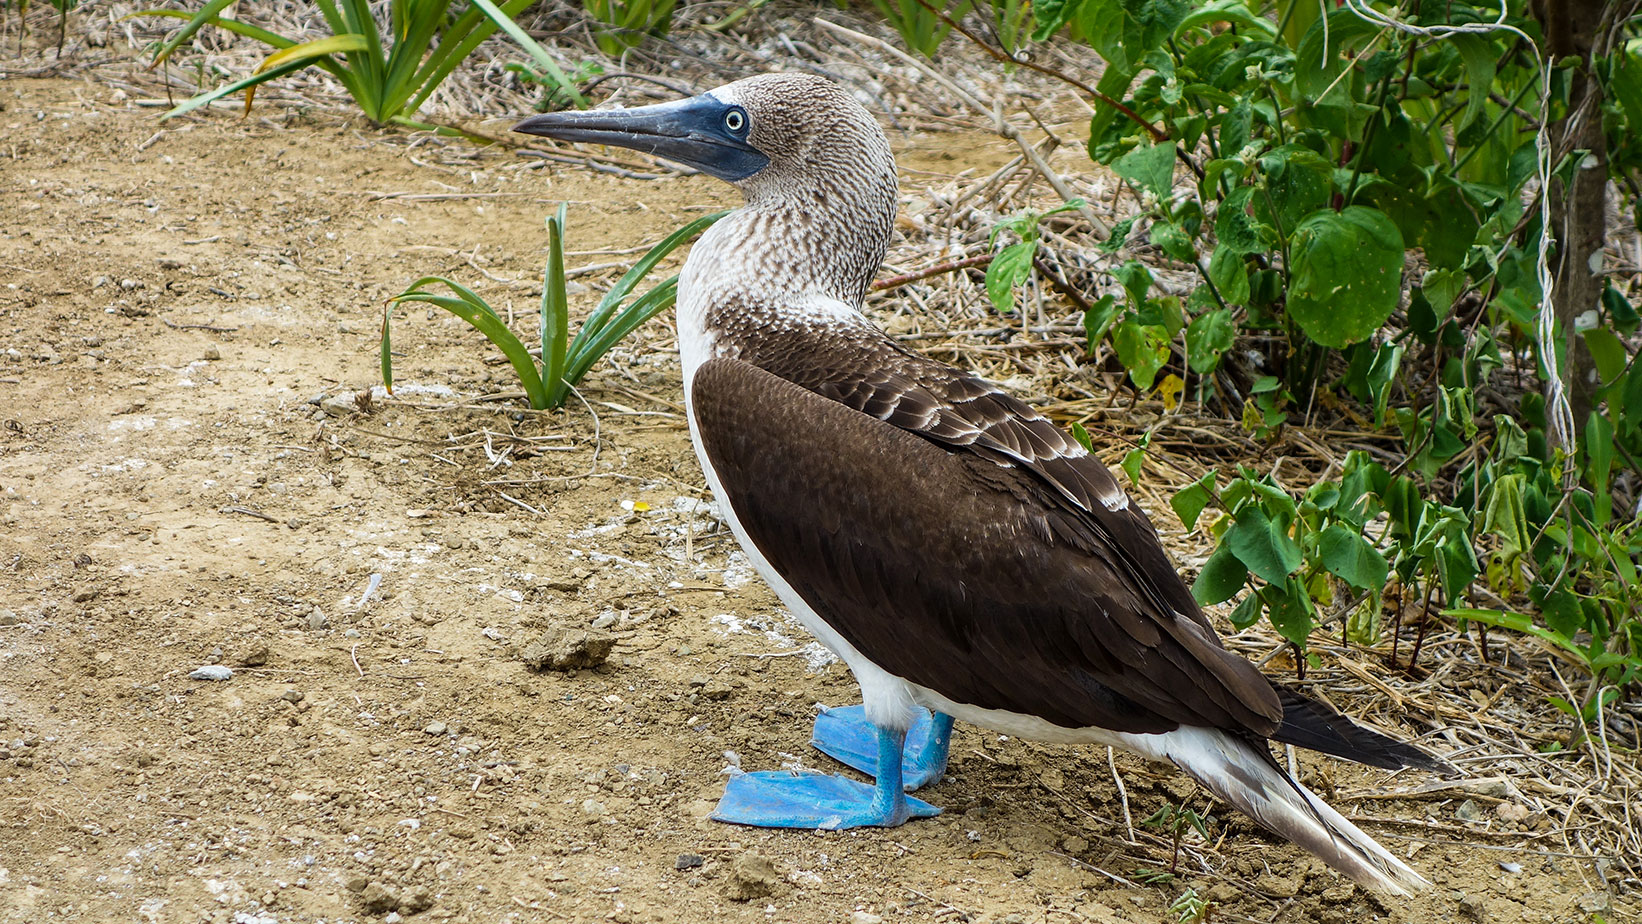 A Blue-footed Booby Introduces Himself